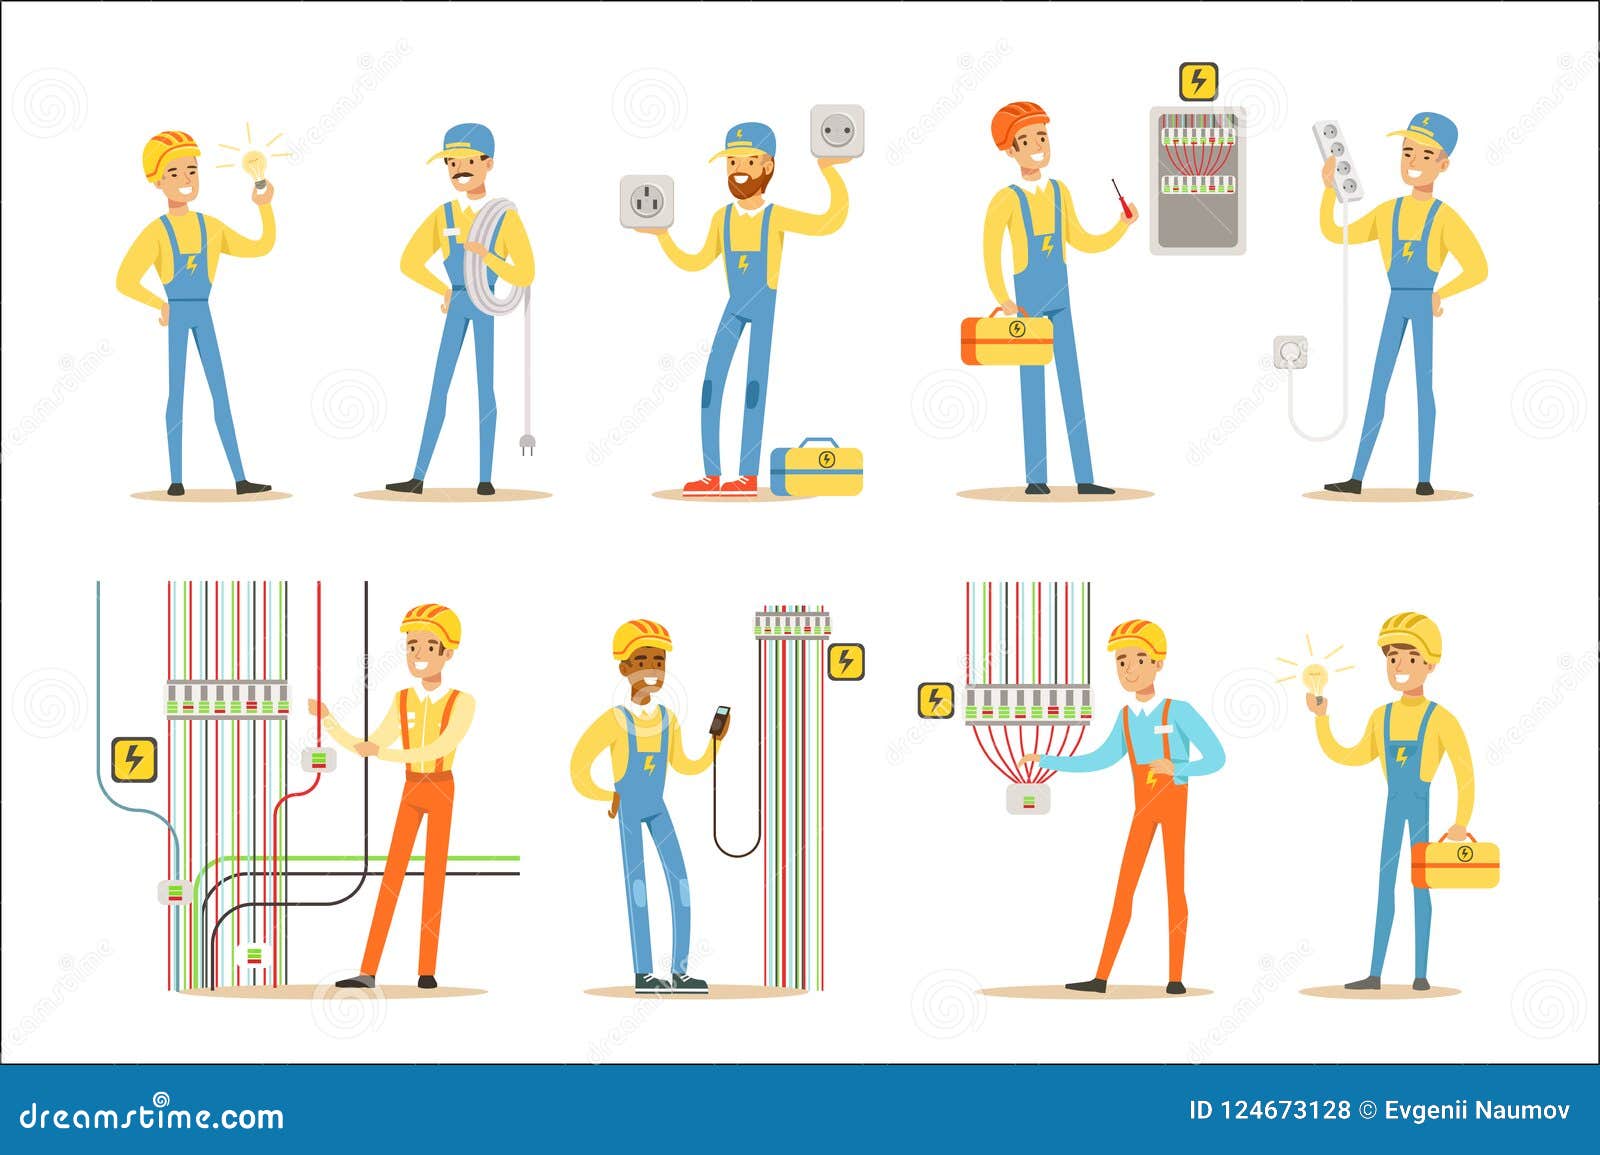 Electrician Specialist with Electric Wires at Work Doing Wireman Repairs  Set of Cartoon Character Scenes Stock Vector - Illustration of electricity,  sign: 124673128